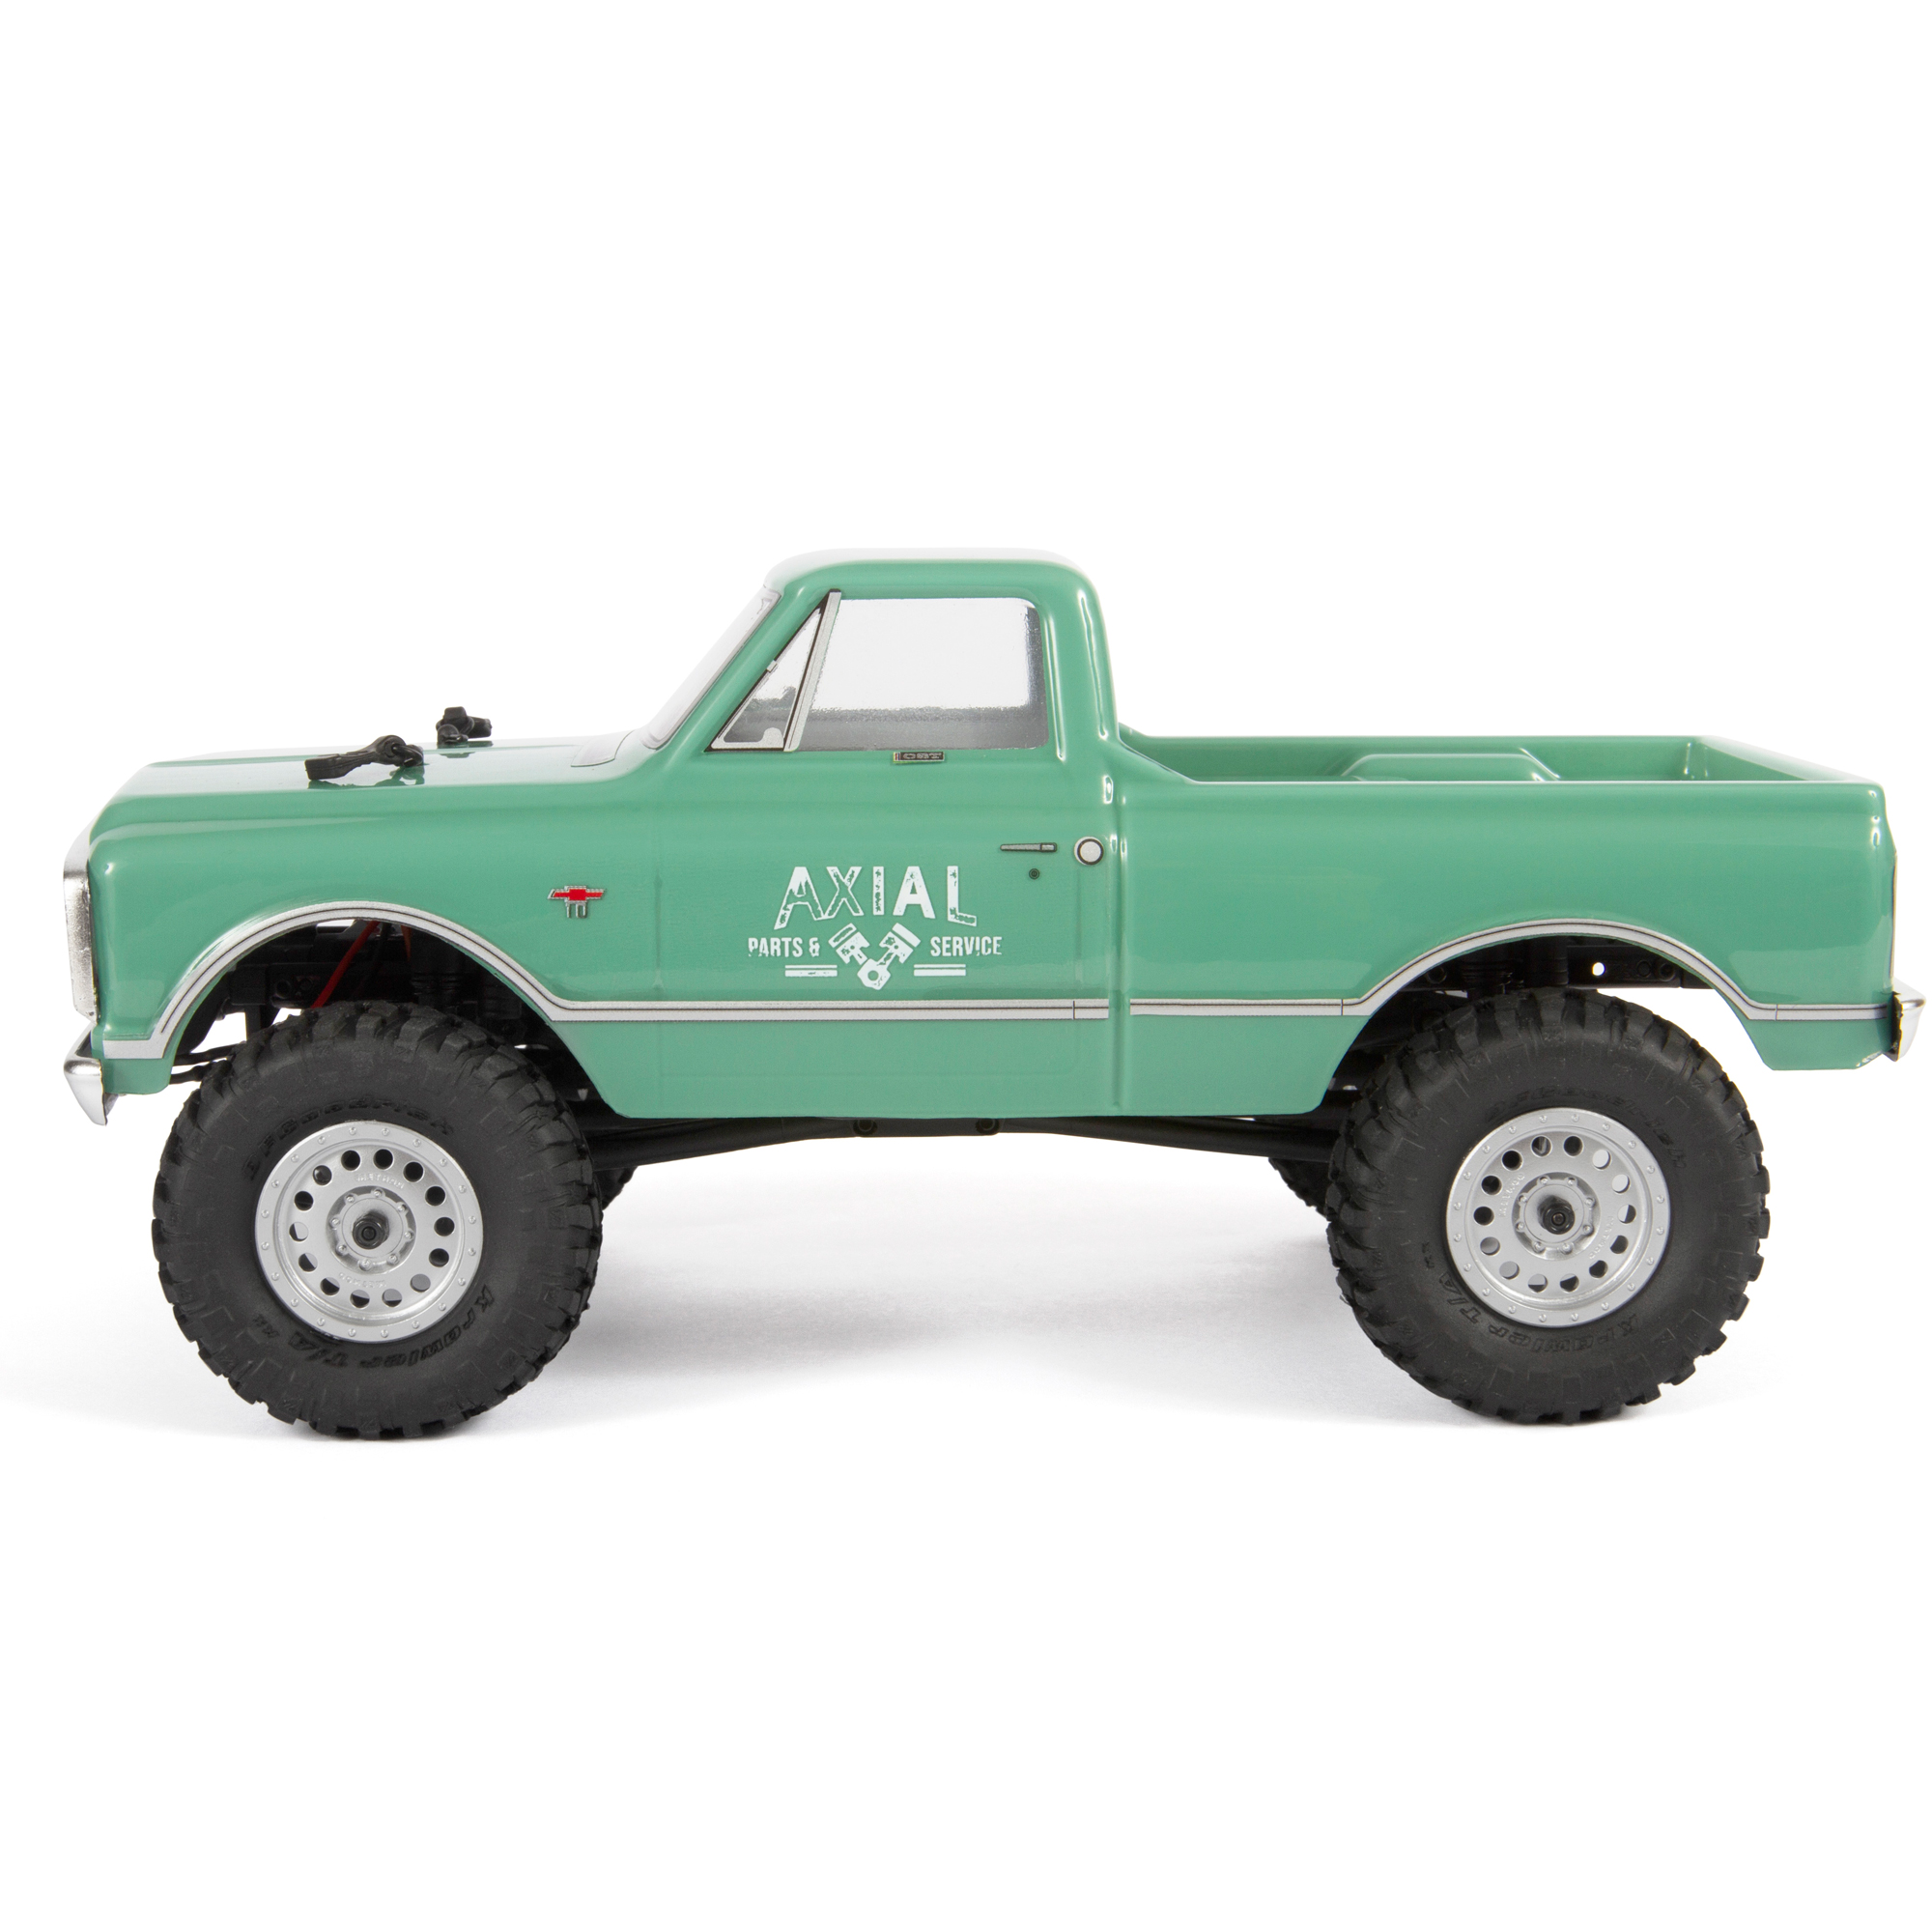 Axial 1/24 SCX24 1967 Chevrolet C10 4 Wheel Drive Truck Brushed RTR Ready to Run Green AXI00001T1 Trucks Electric RTR Other - image 2 of 9